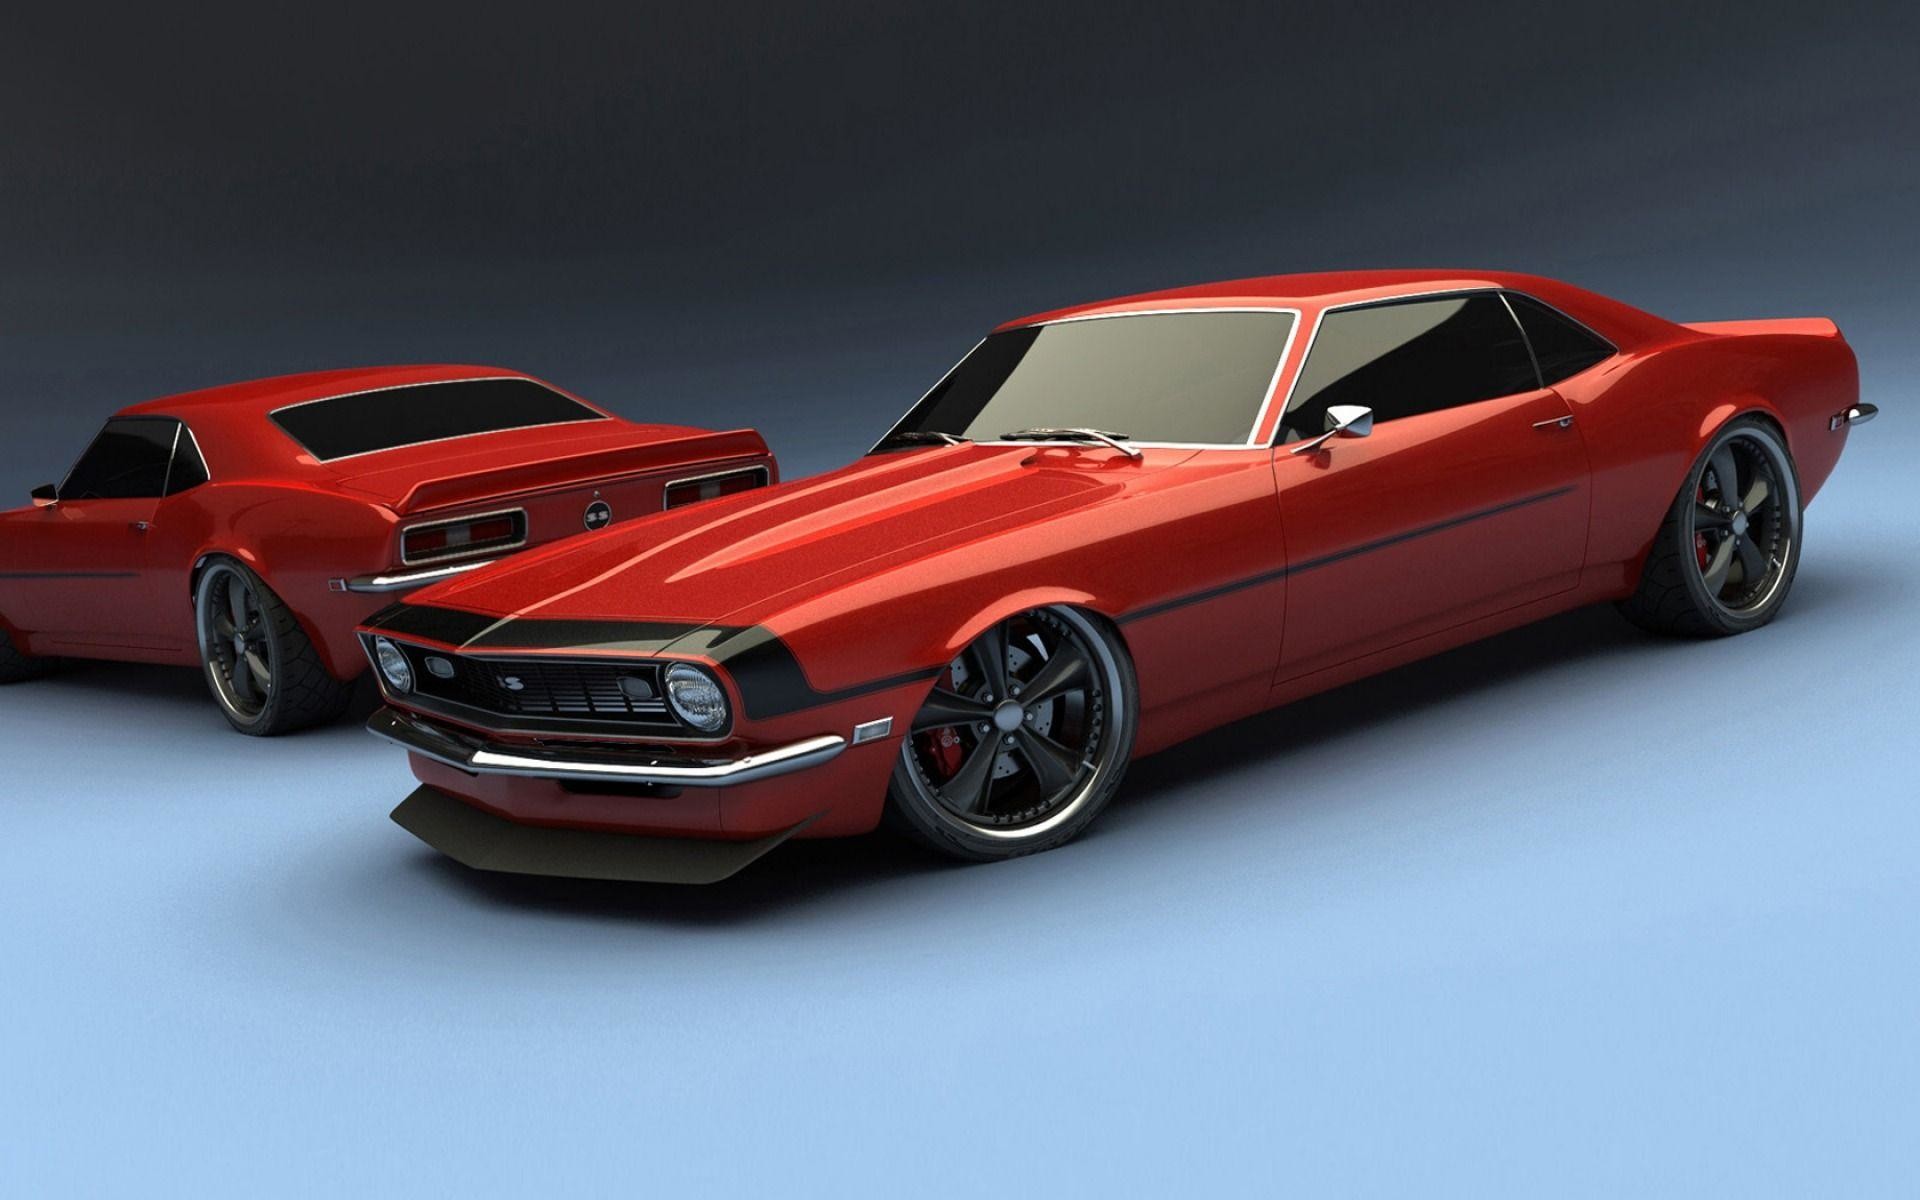 1920x1200 Classic Muscle Car Wallpapers by Reuben Lathrop #6